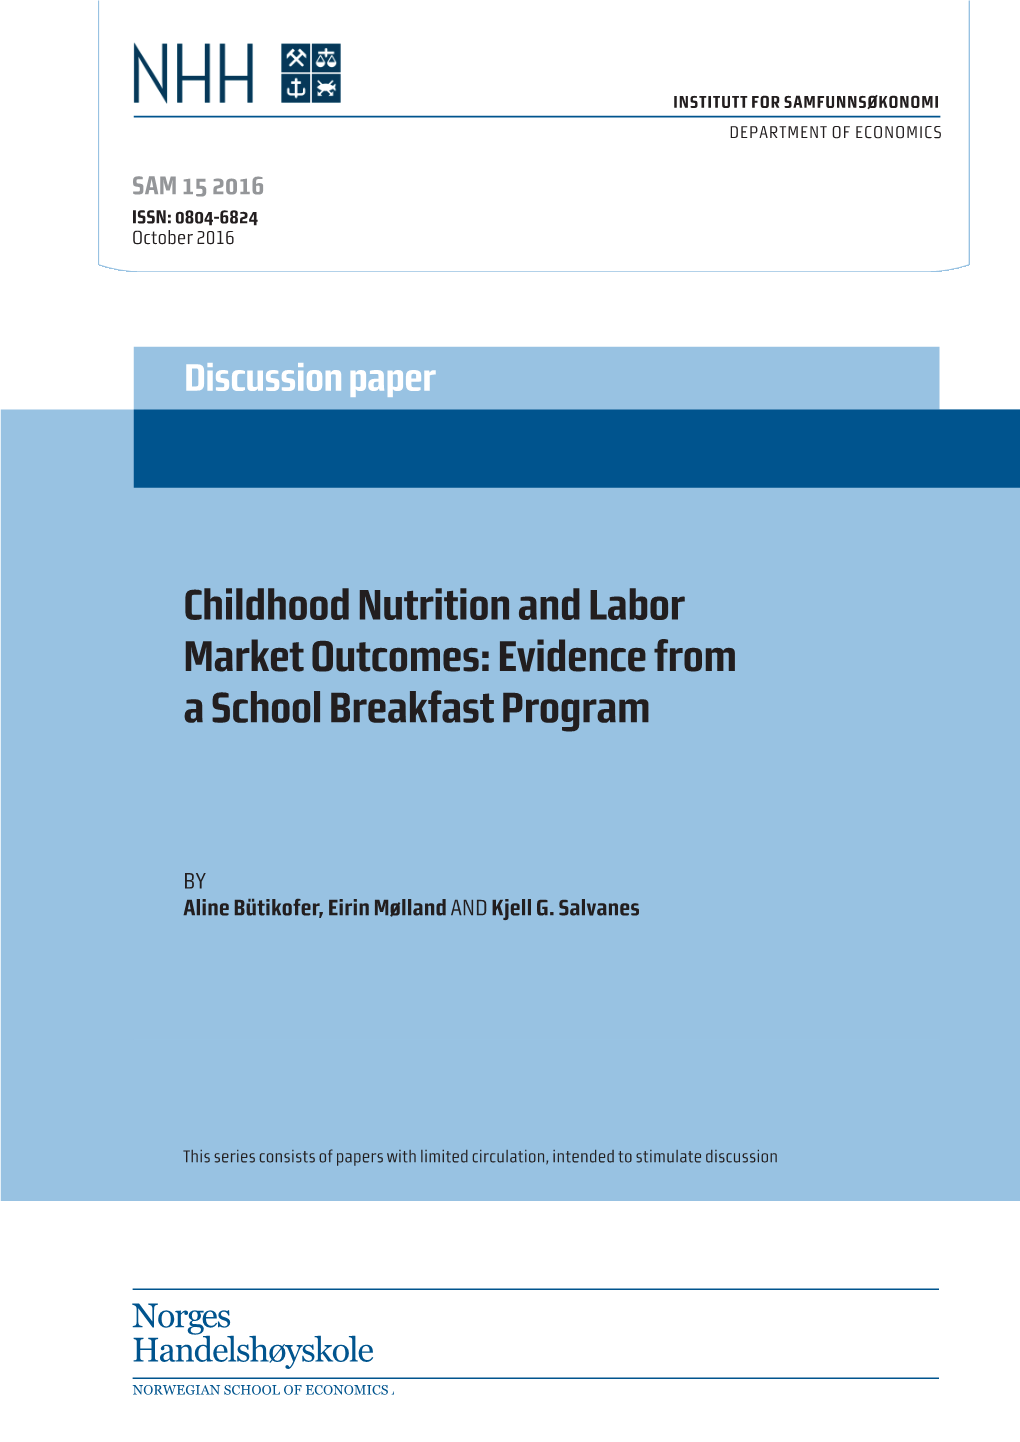 Childhood Nutrition and Labor Market Outcomes: Evidence from a School Breakfast Program